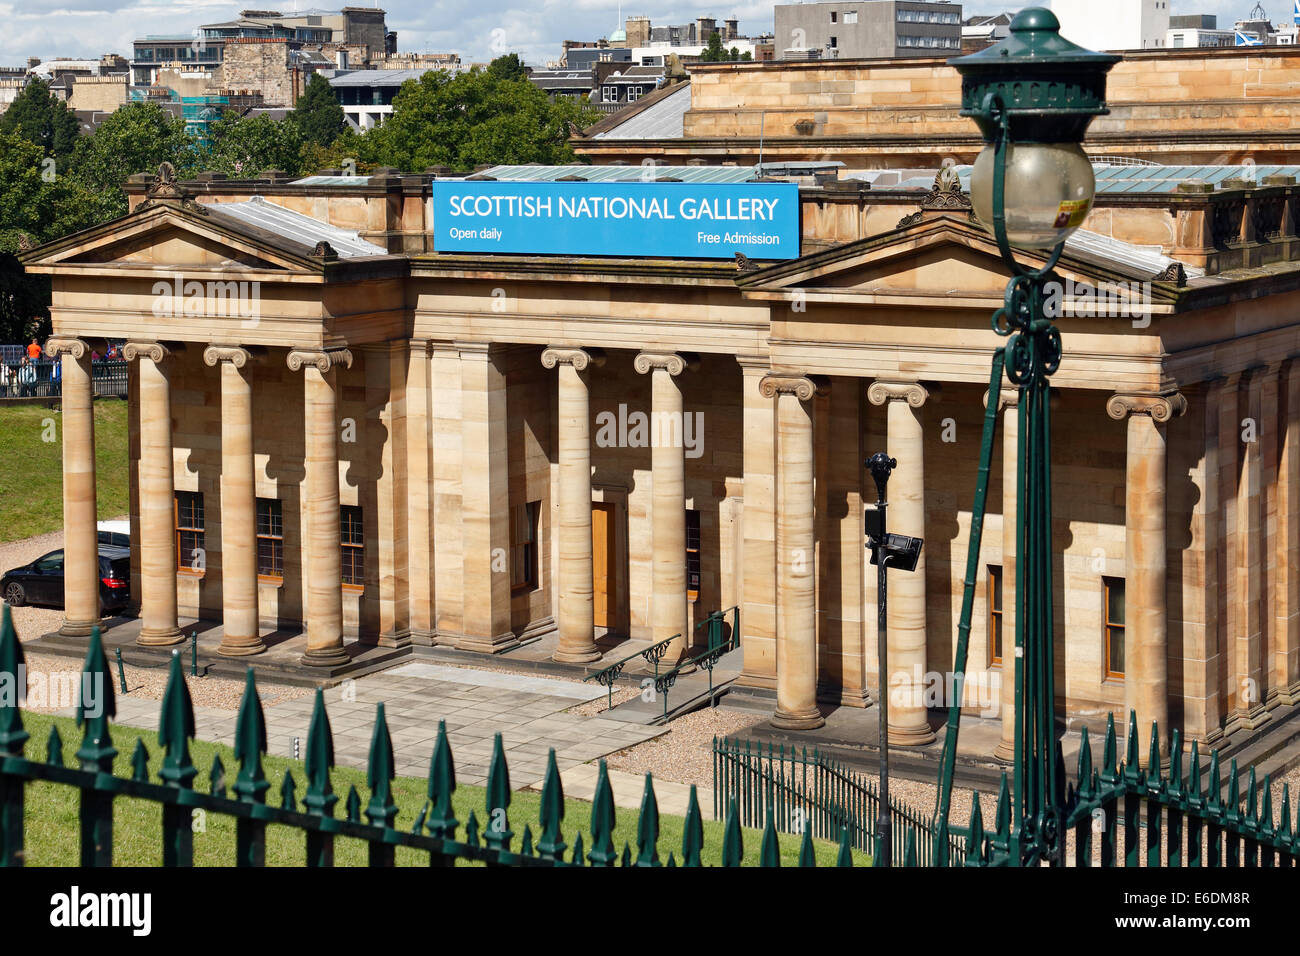 The Scottish National Gallery on The Mound viewed from the South in Edinburgh city centre, Scotland, UK Stock Photo